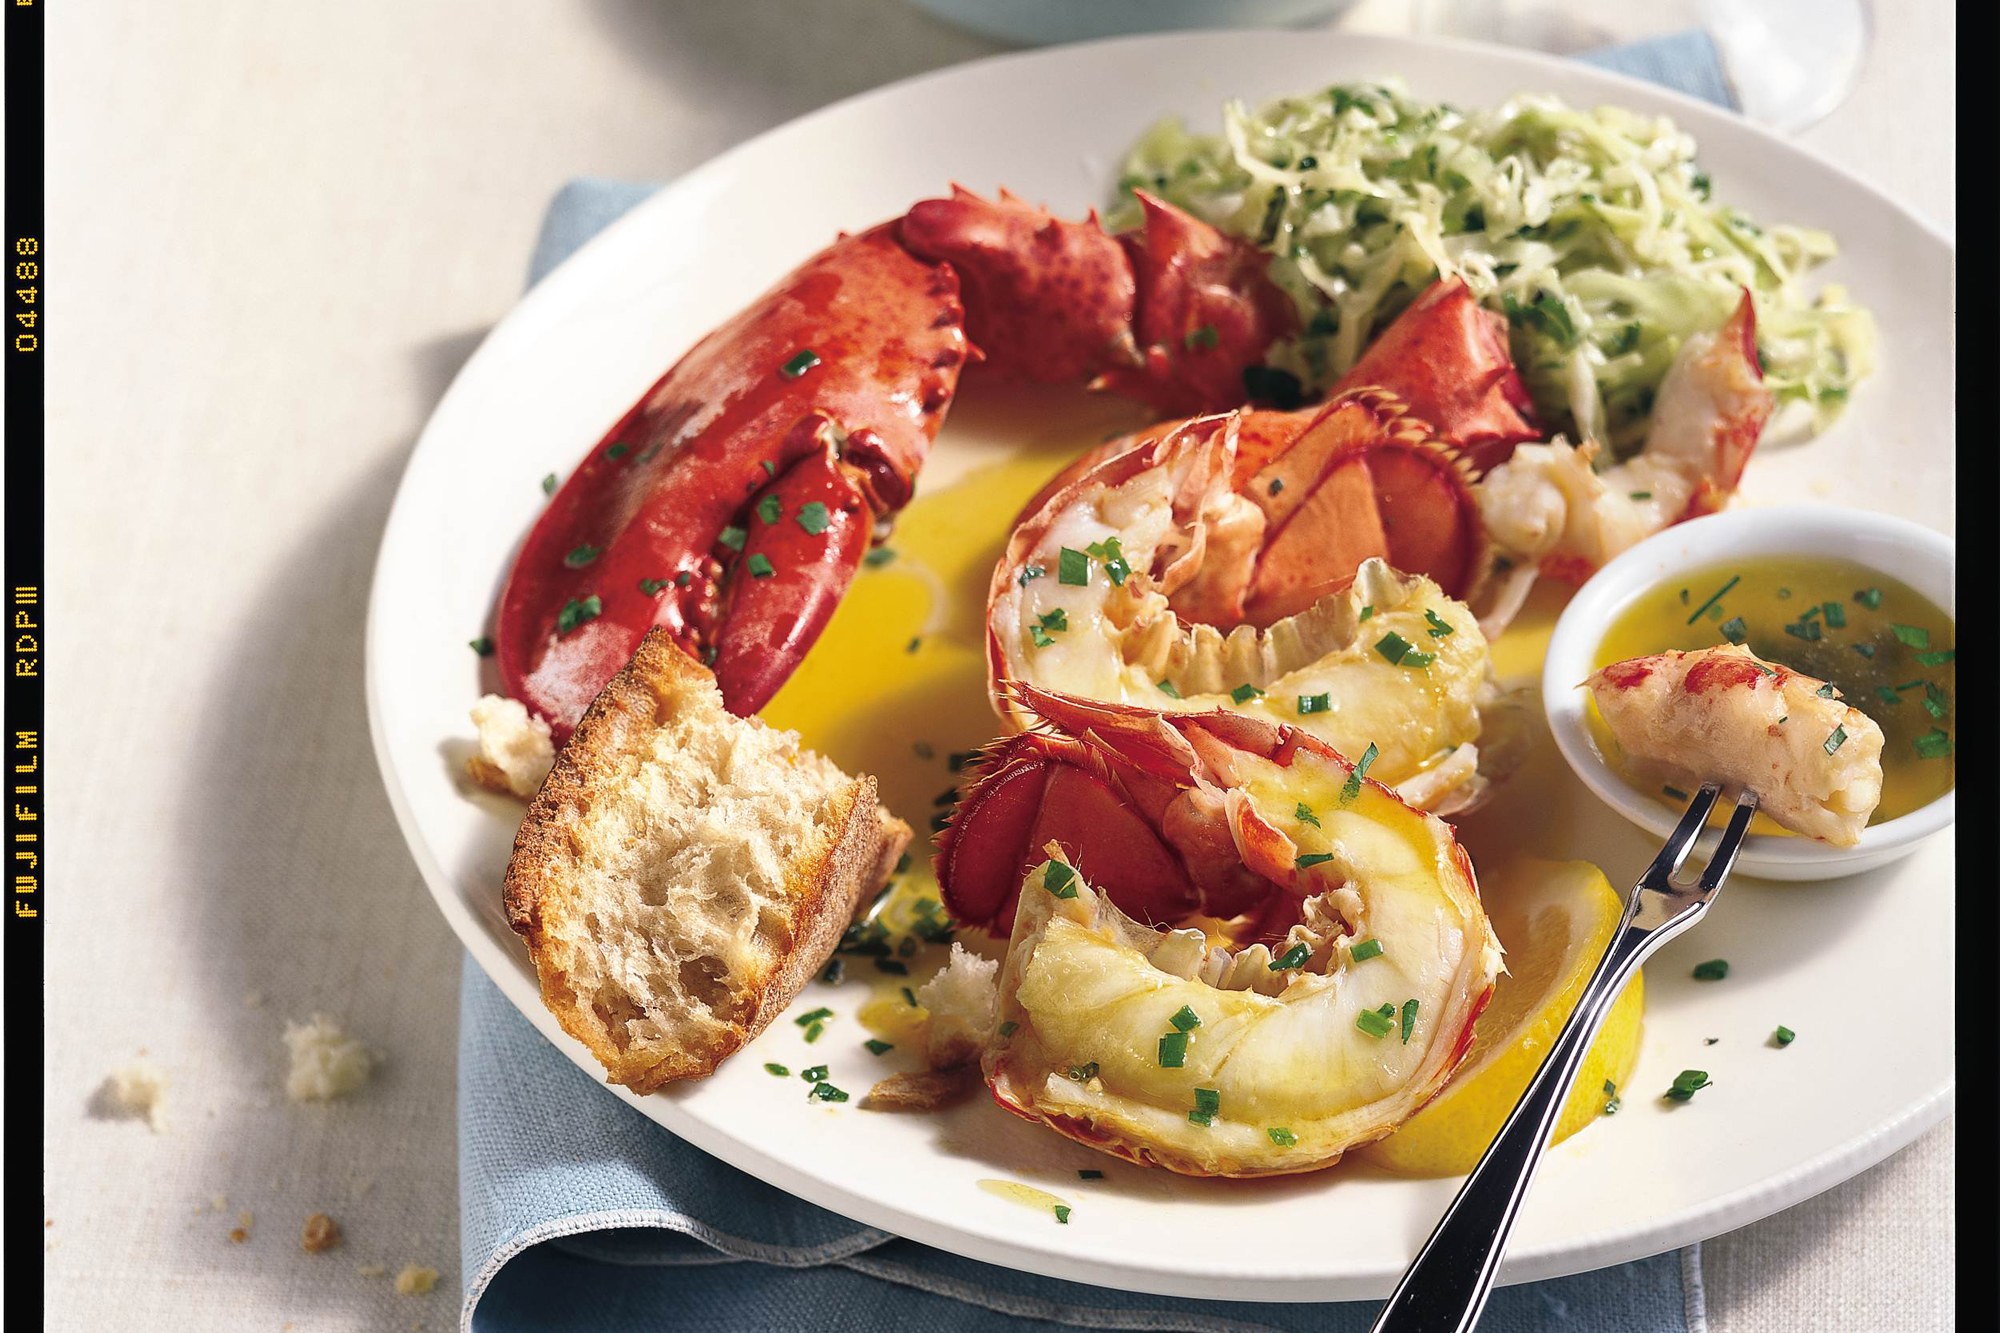 Steamed Lobster with Lemon-Herb Butter recipe | Epicurious.com